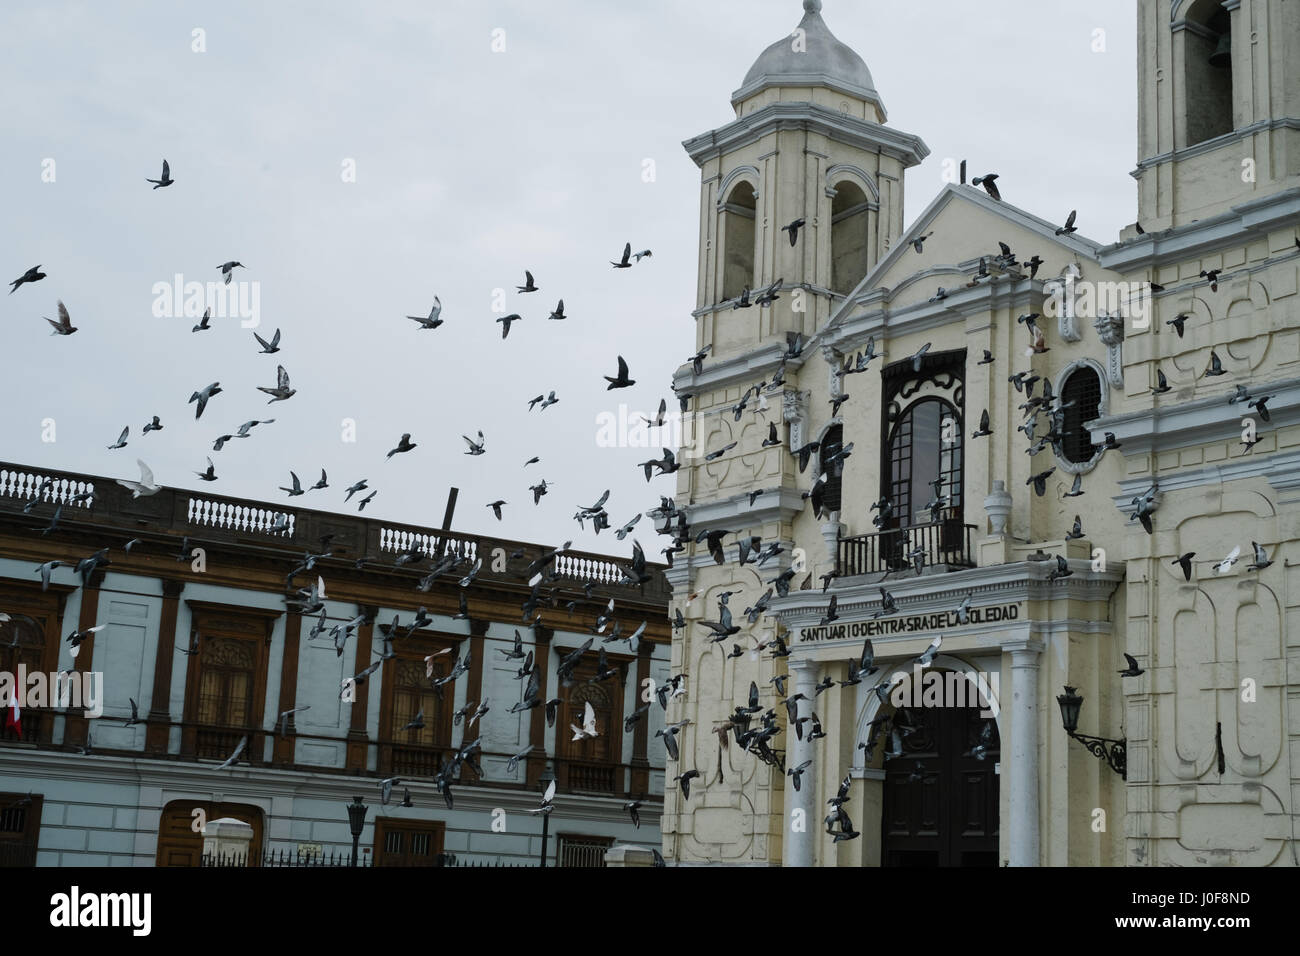 Plaza de Armas in the Old center of Lima with church. Stock Photo